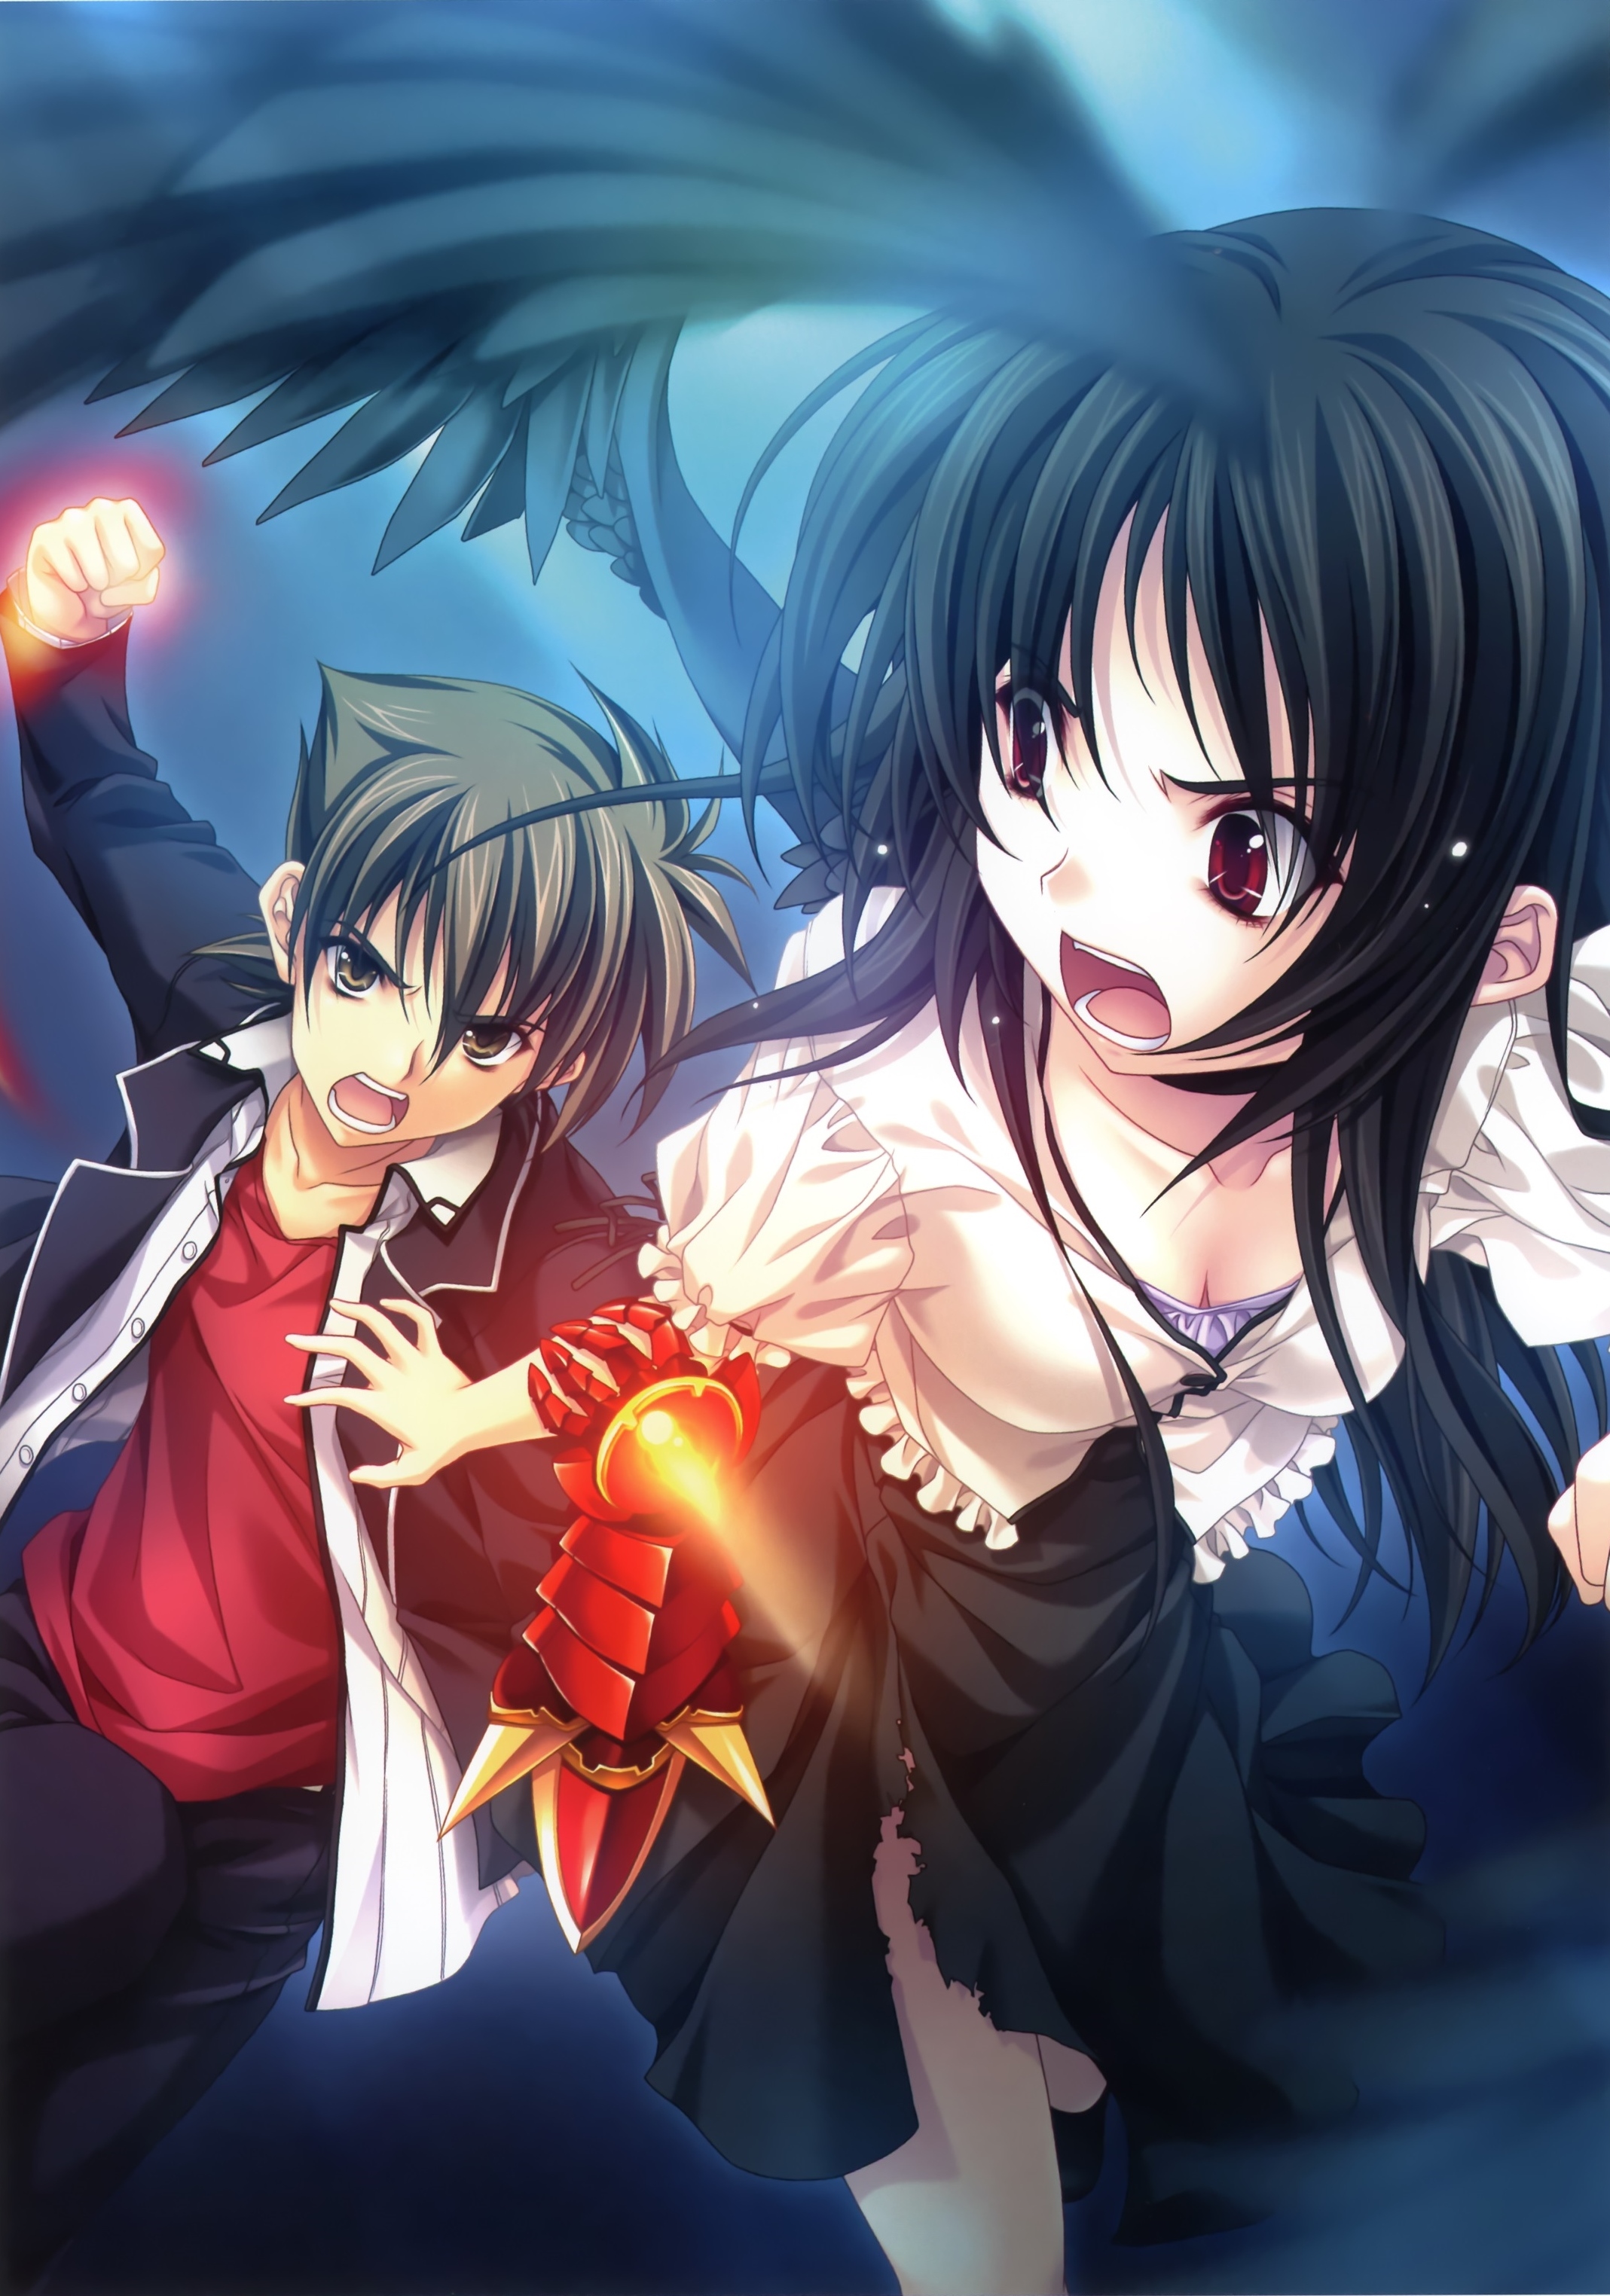 Can Issei destroy a planet (High School DxD)? - Quora